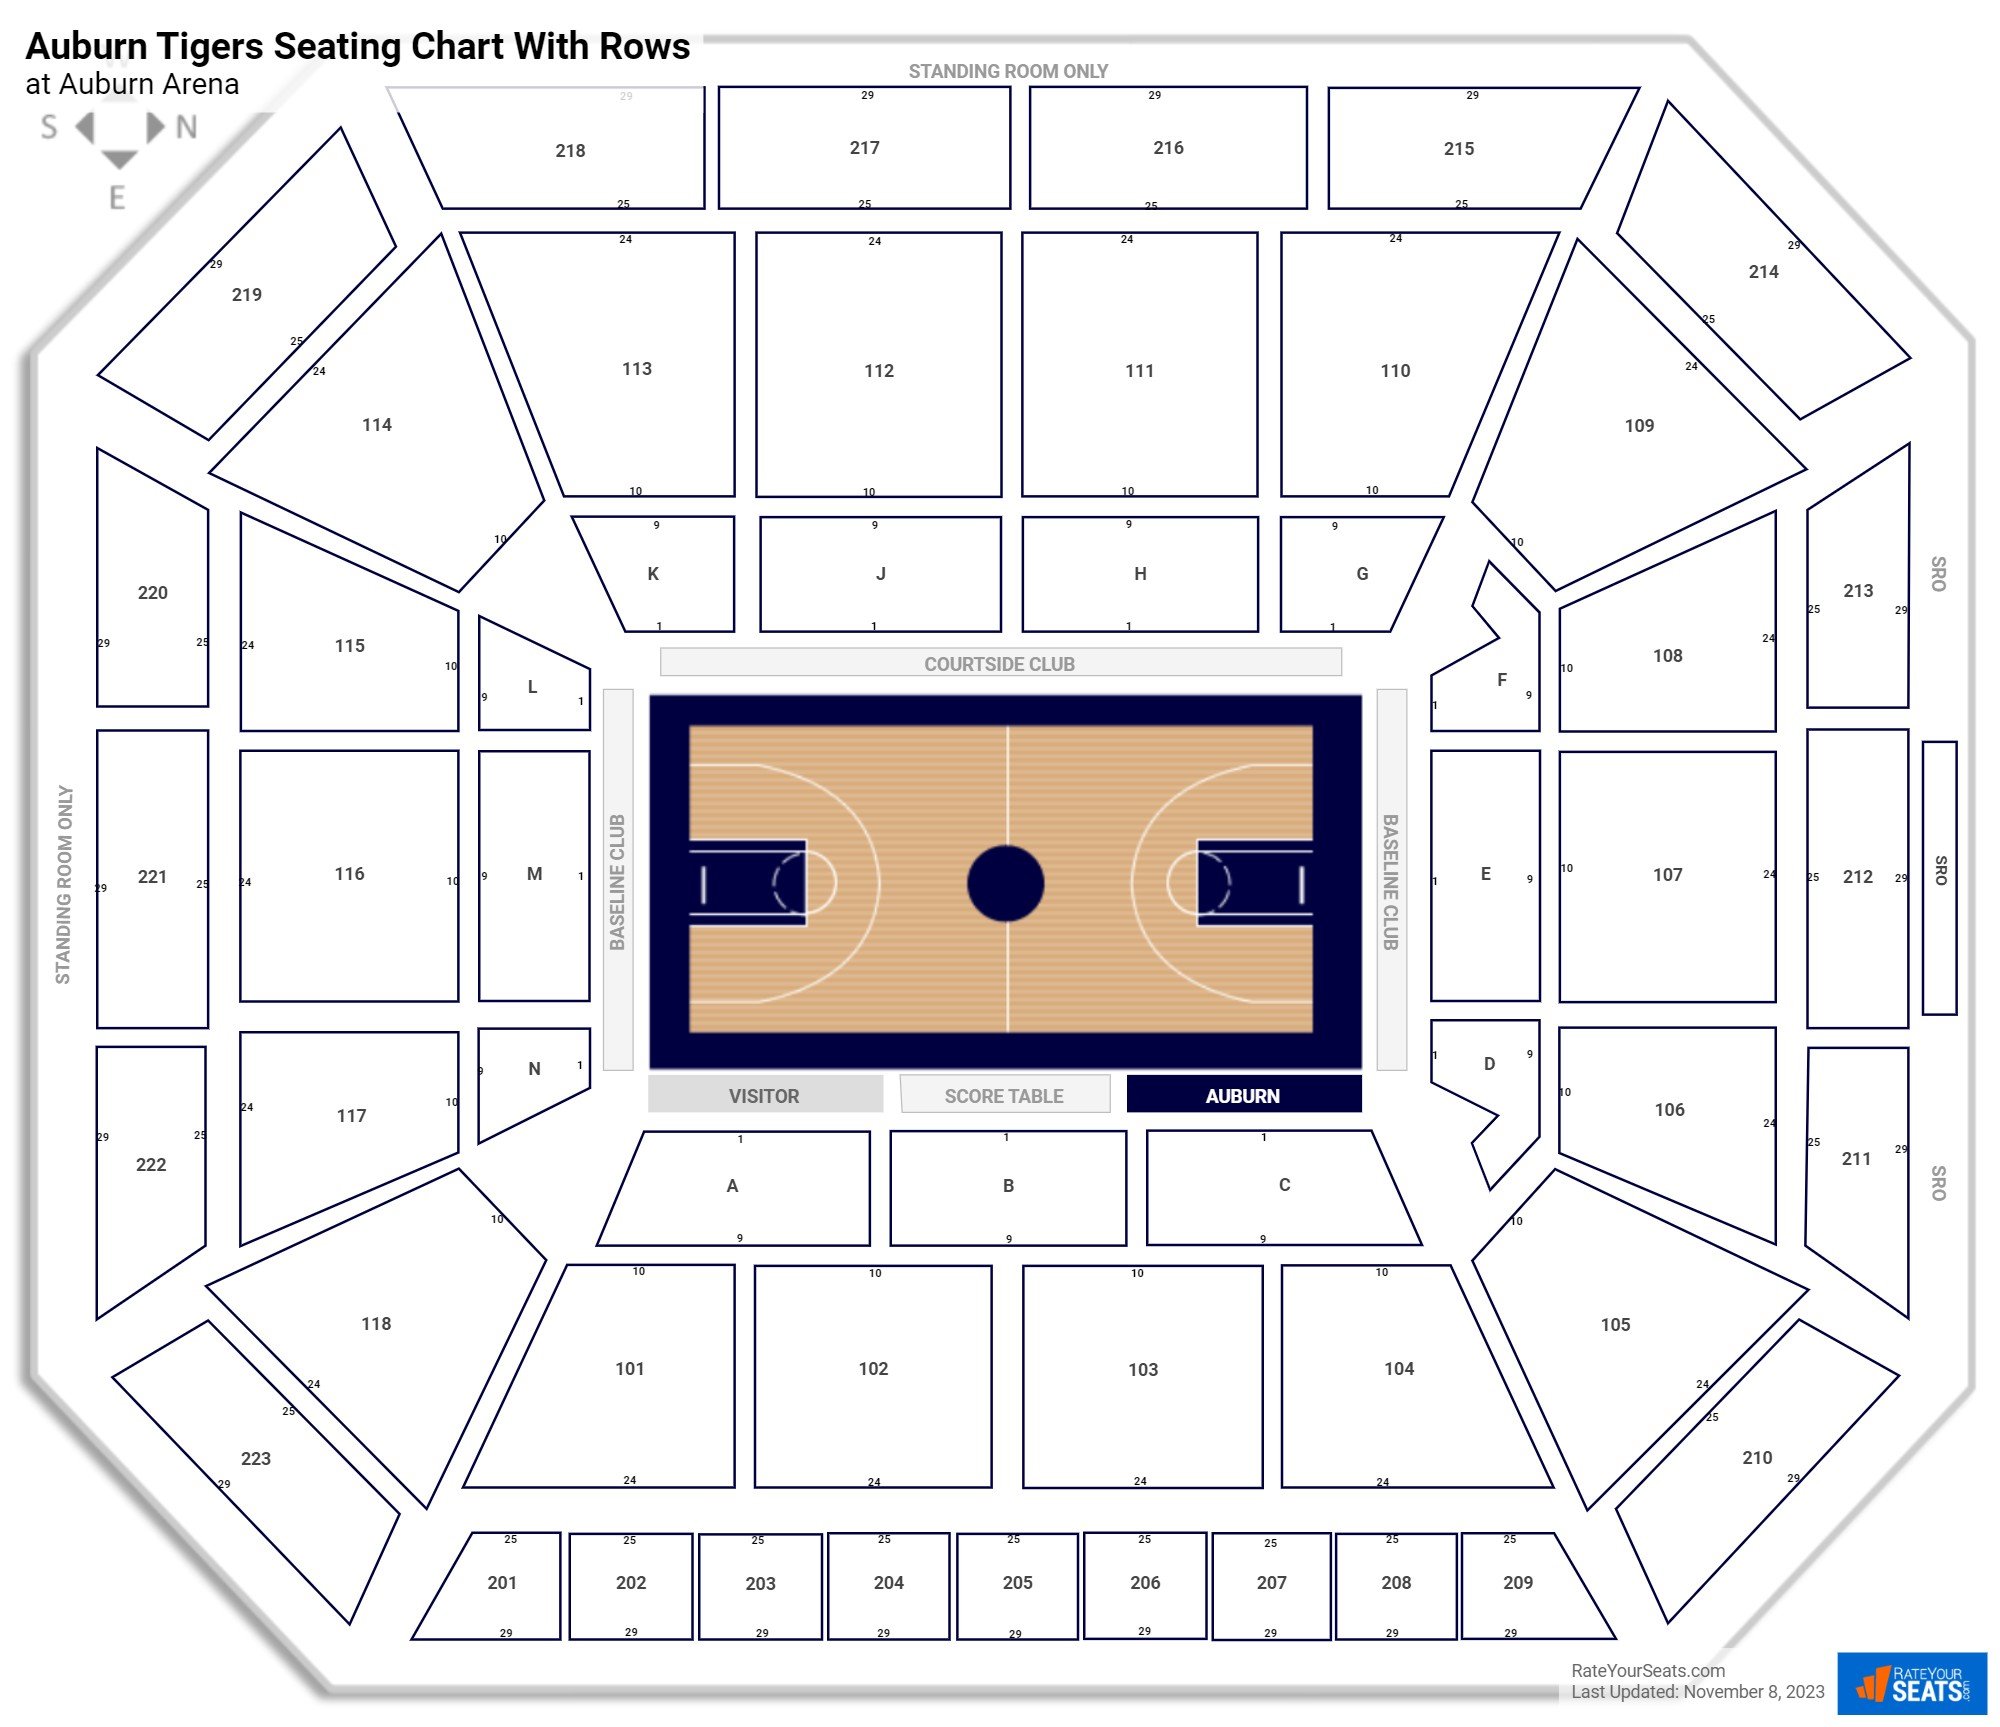 Neville Arena seating chart with row numbers